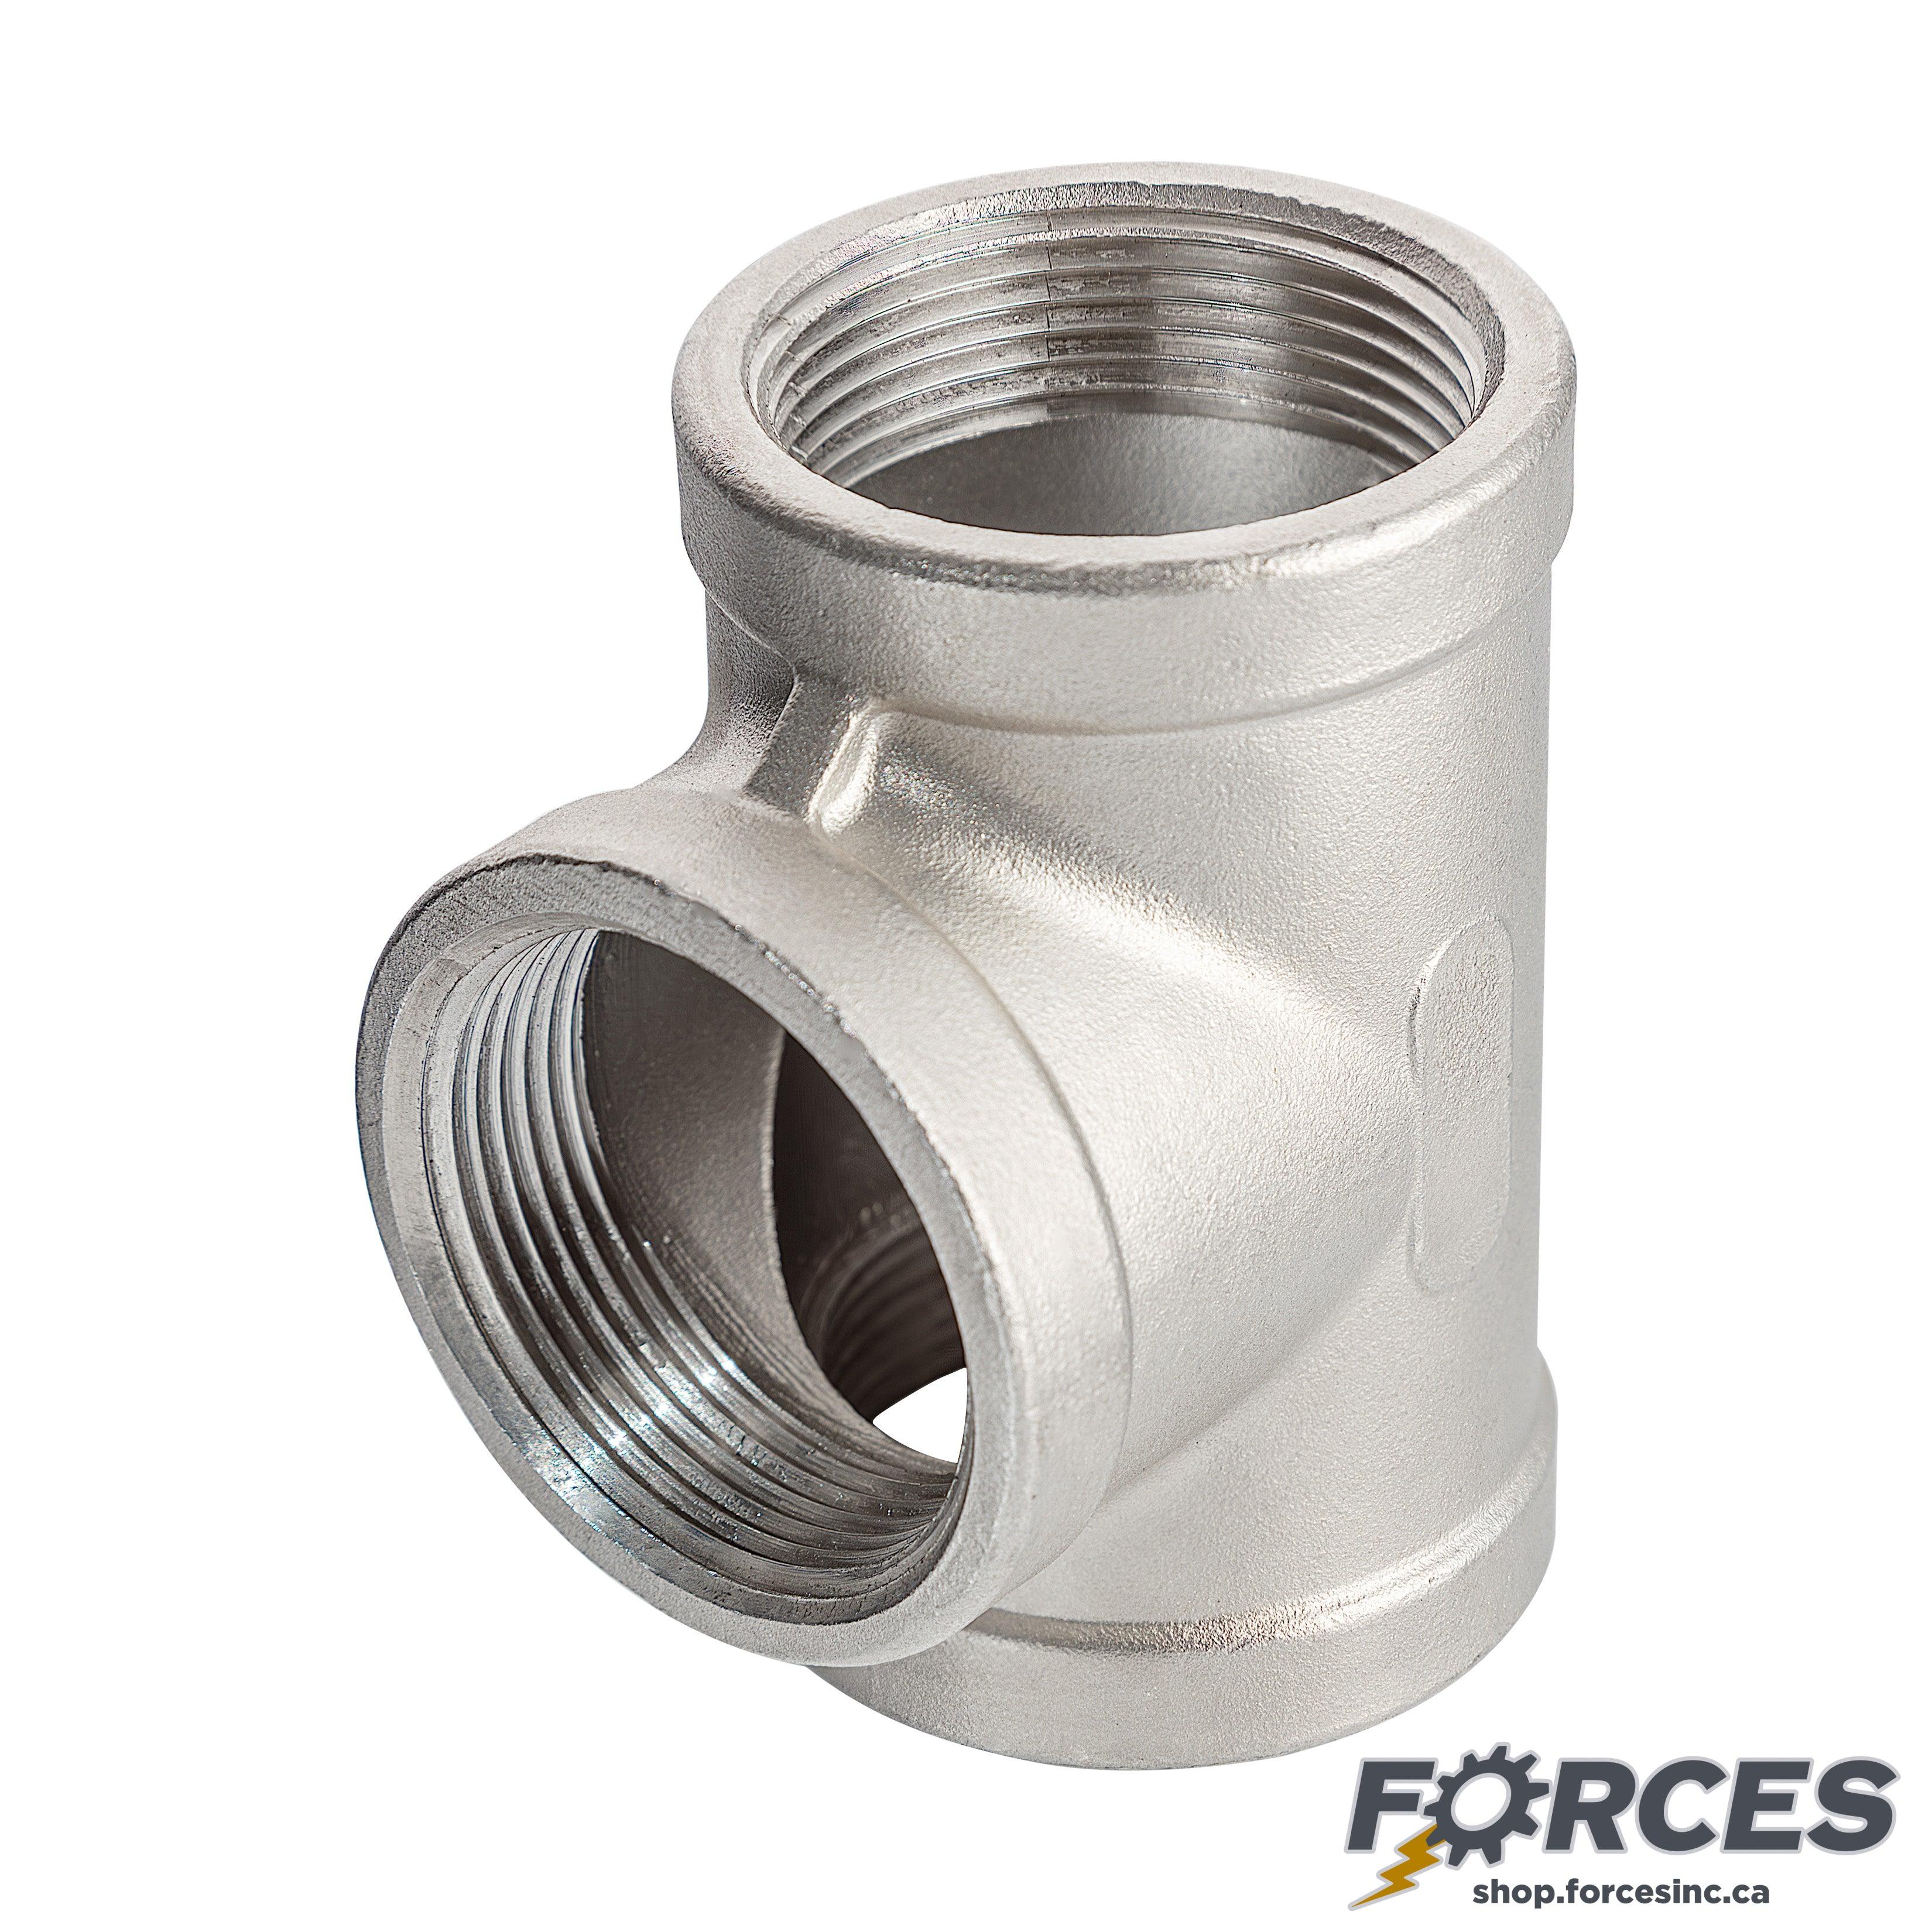 1-1/2" Tee NPT #150 - Stainless Steel 316 - Forces Inc